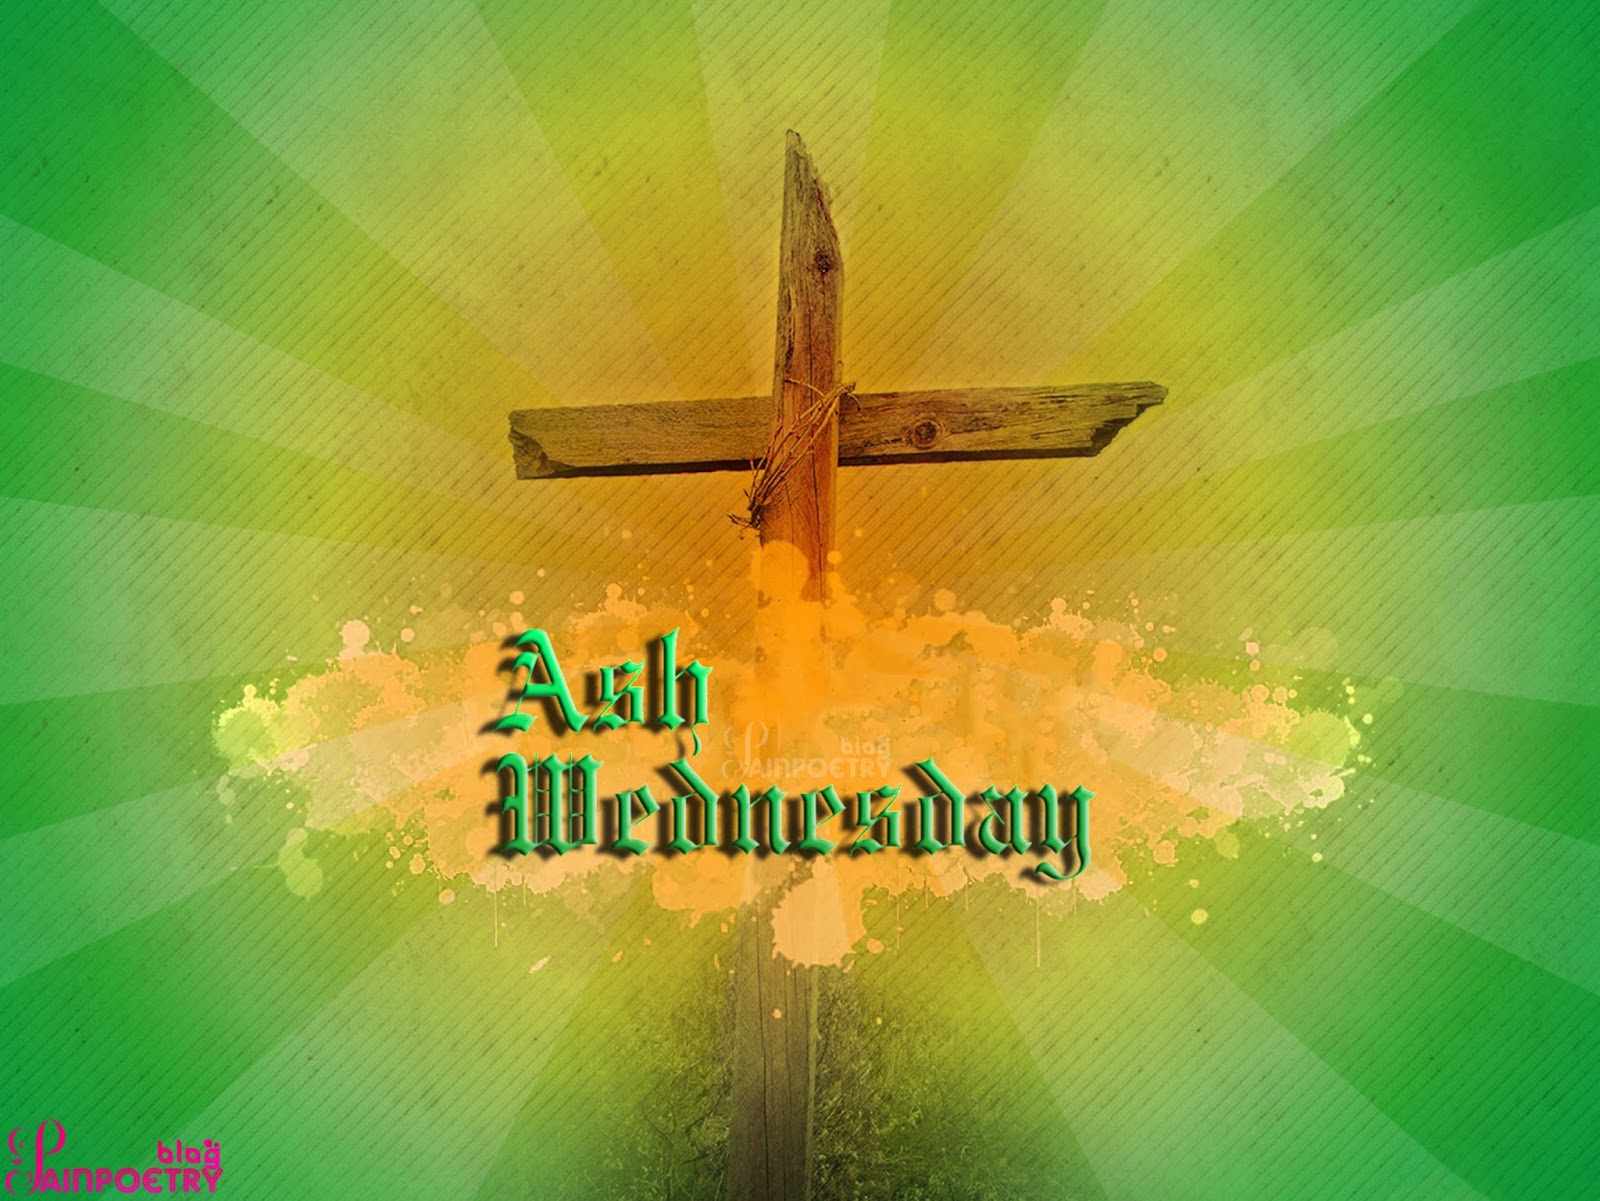 Ash Wednesday Quotes And Sayings